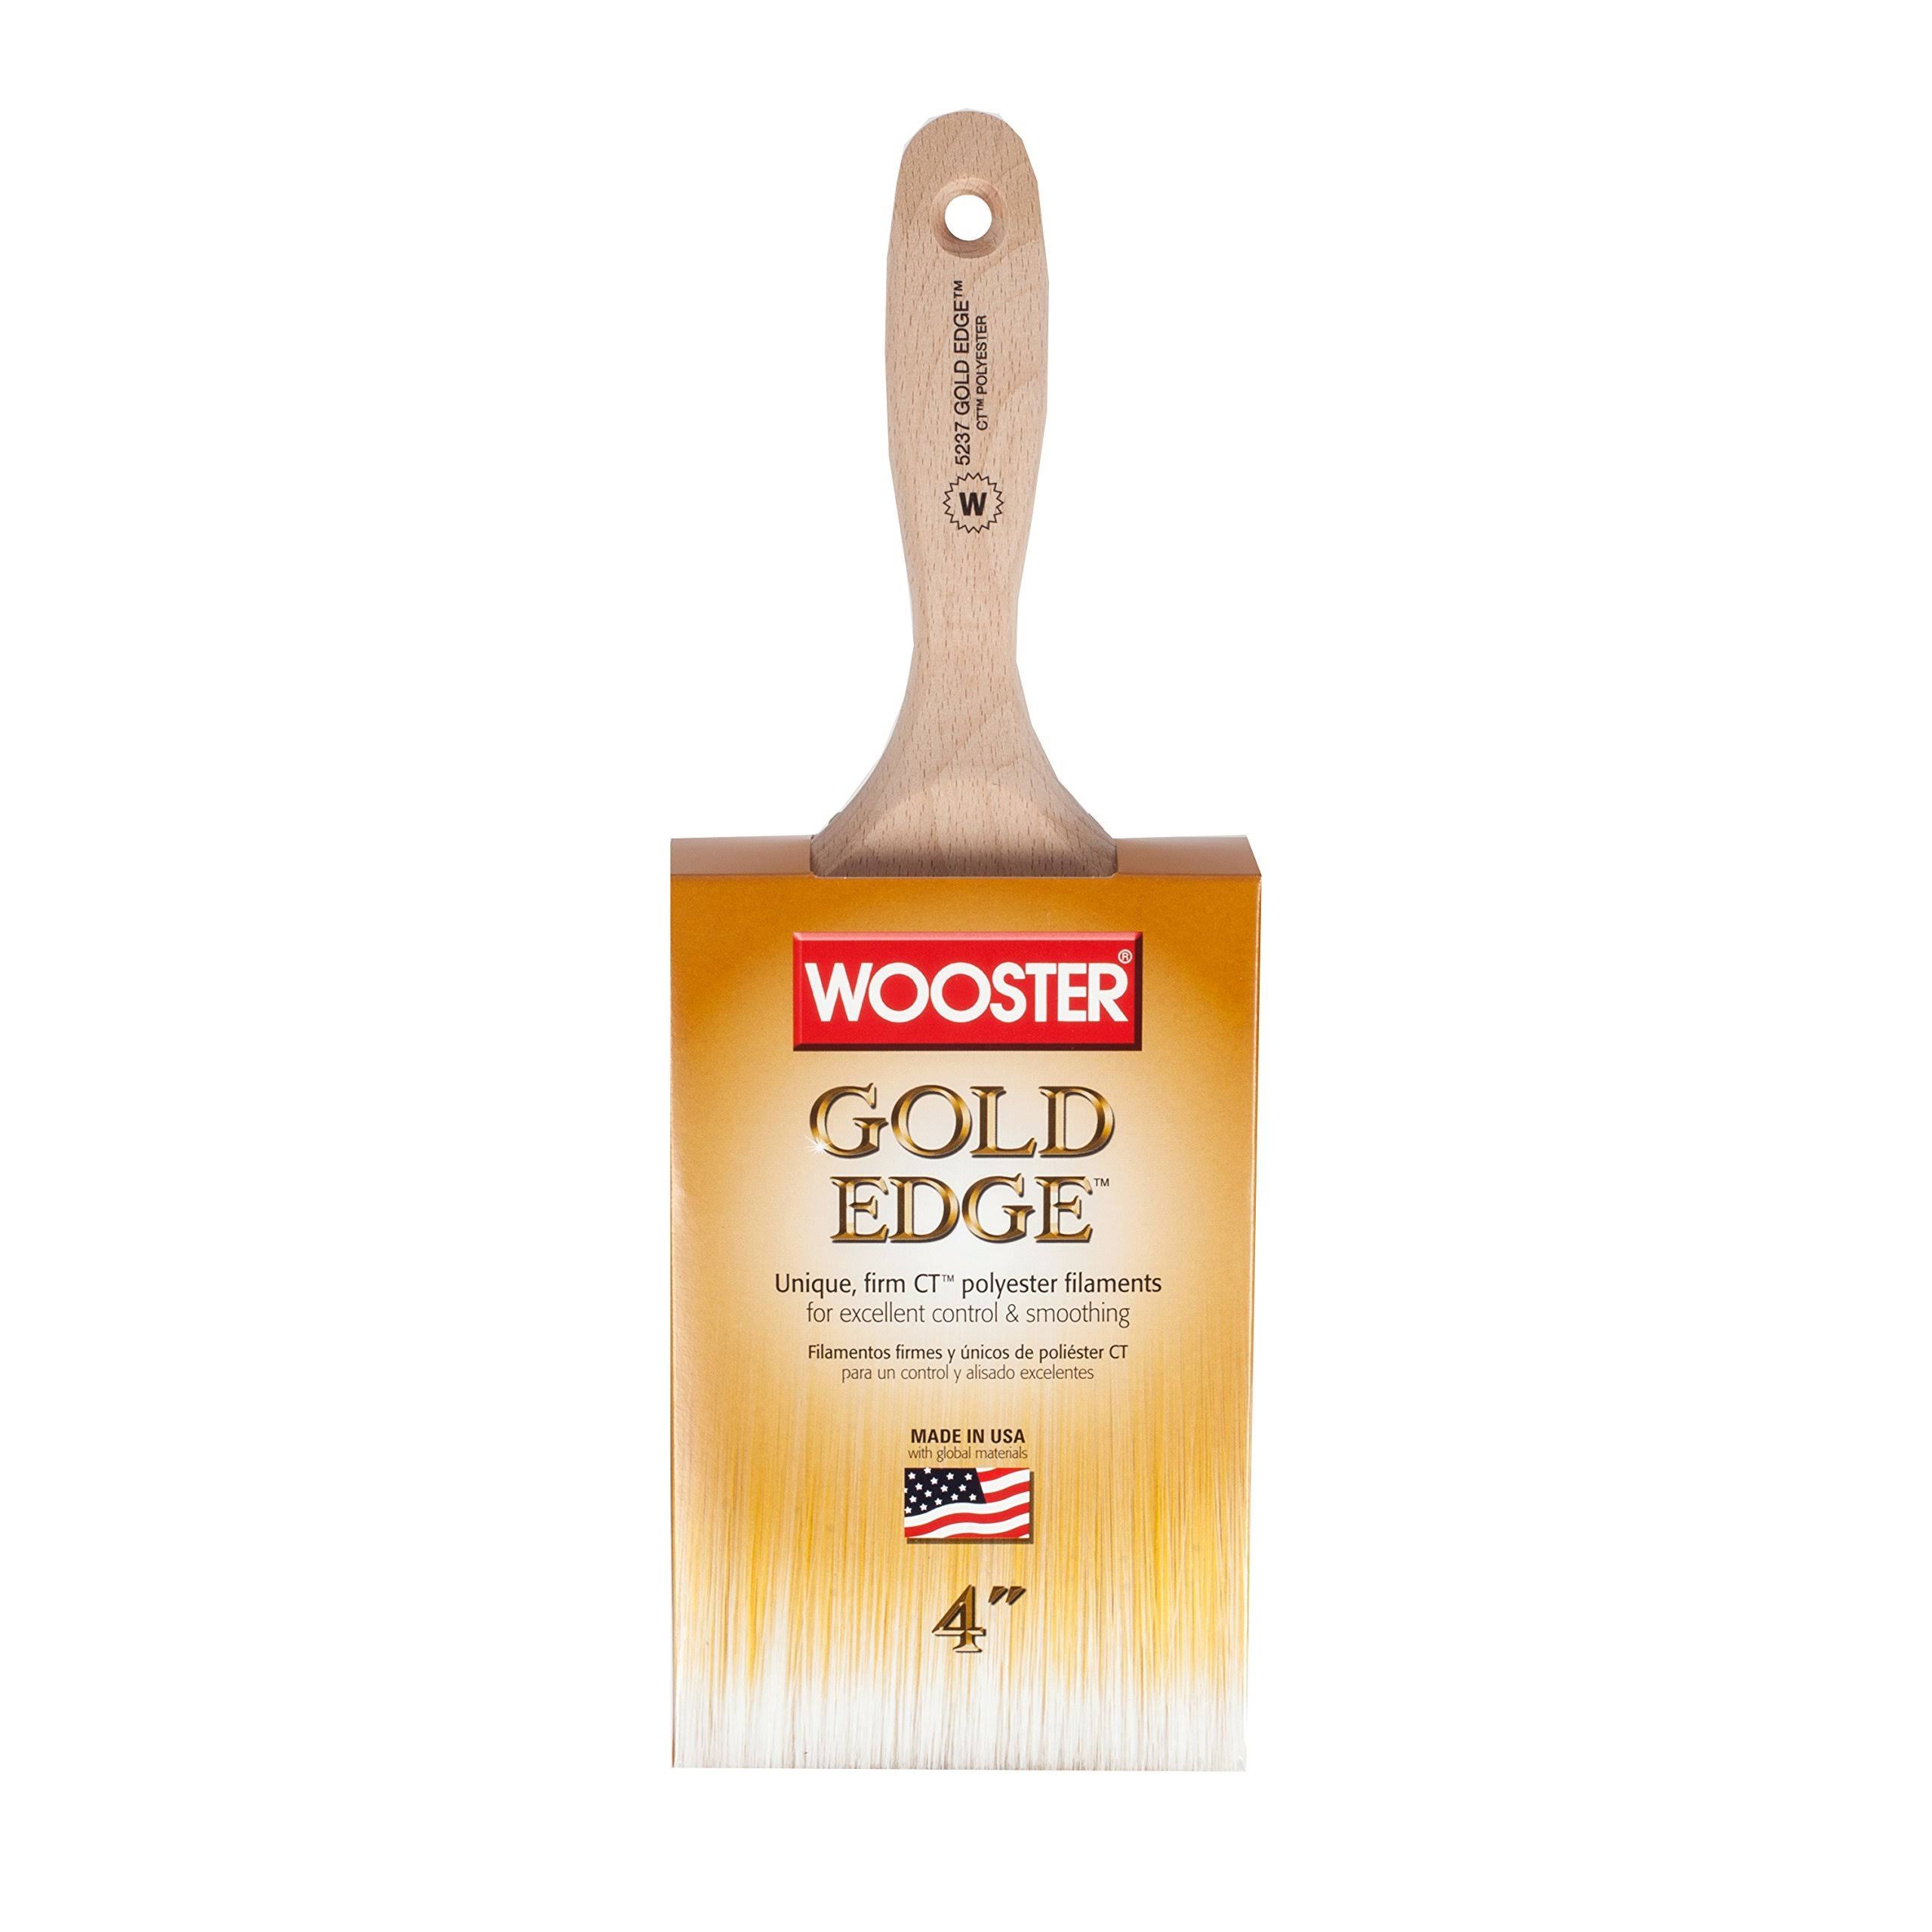 Wooster Edge Polyester Flat Brush - Gold, 4"